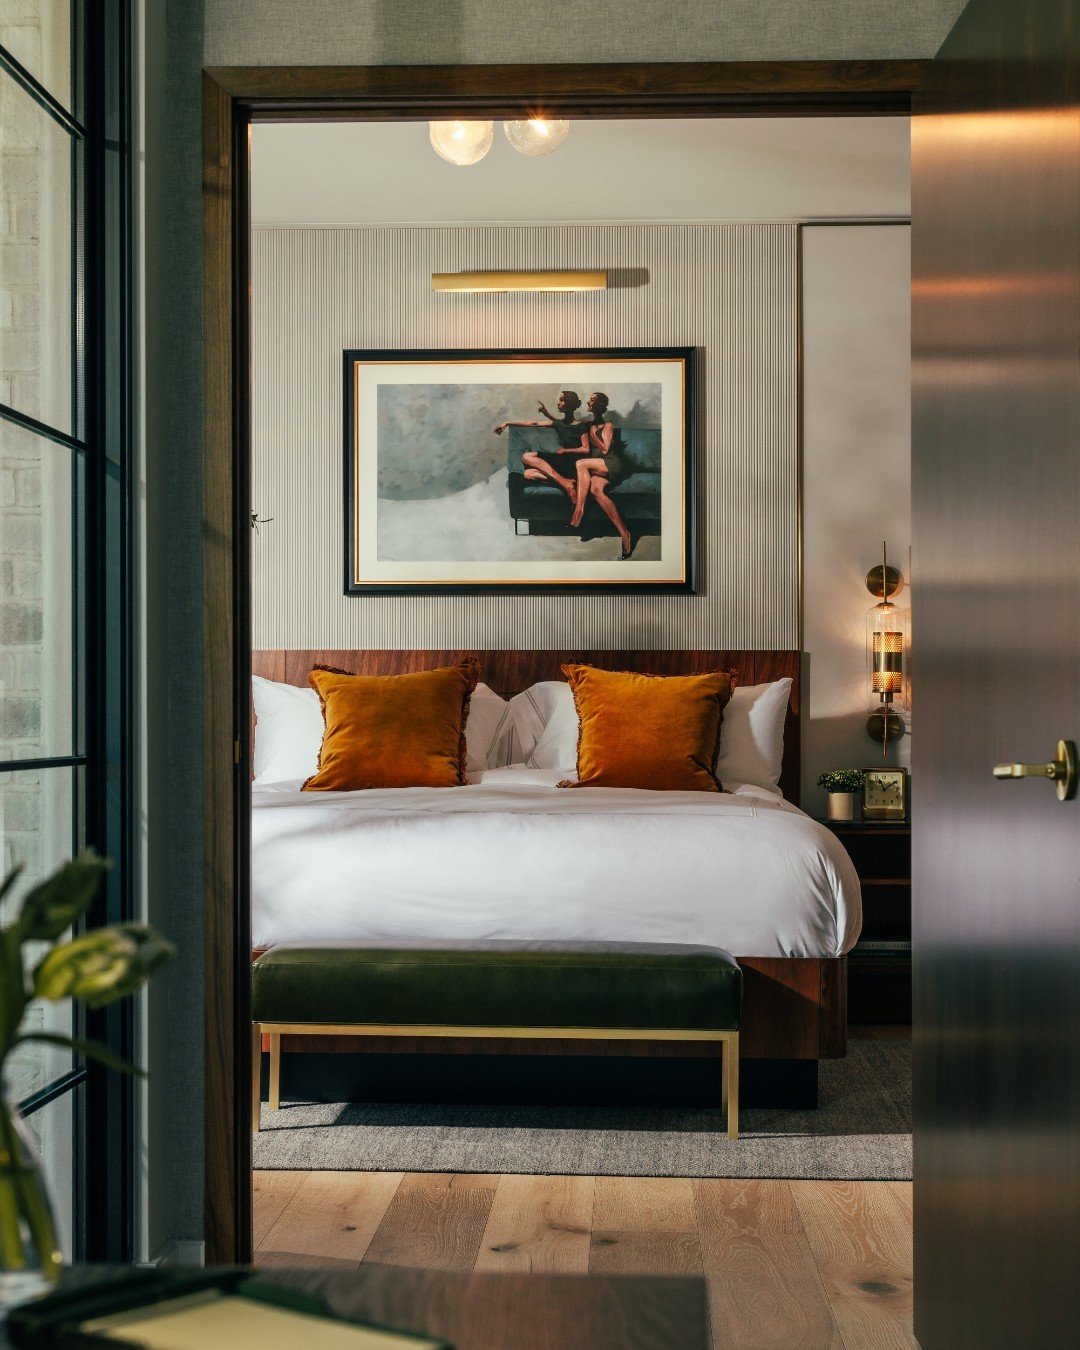 @TheGlobalAmbassadorHotel was just named among this year's 41 Best New Hotels in North America and Europe by @Esquire! In four short months since opening, Sam Fox's debut hotel is making major waves nationwide. Link in bio. #ClientLove